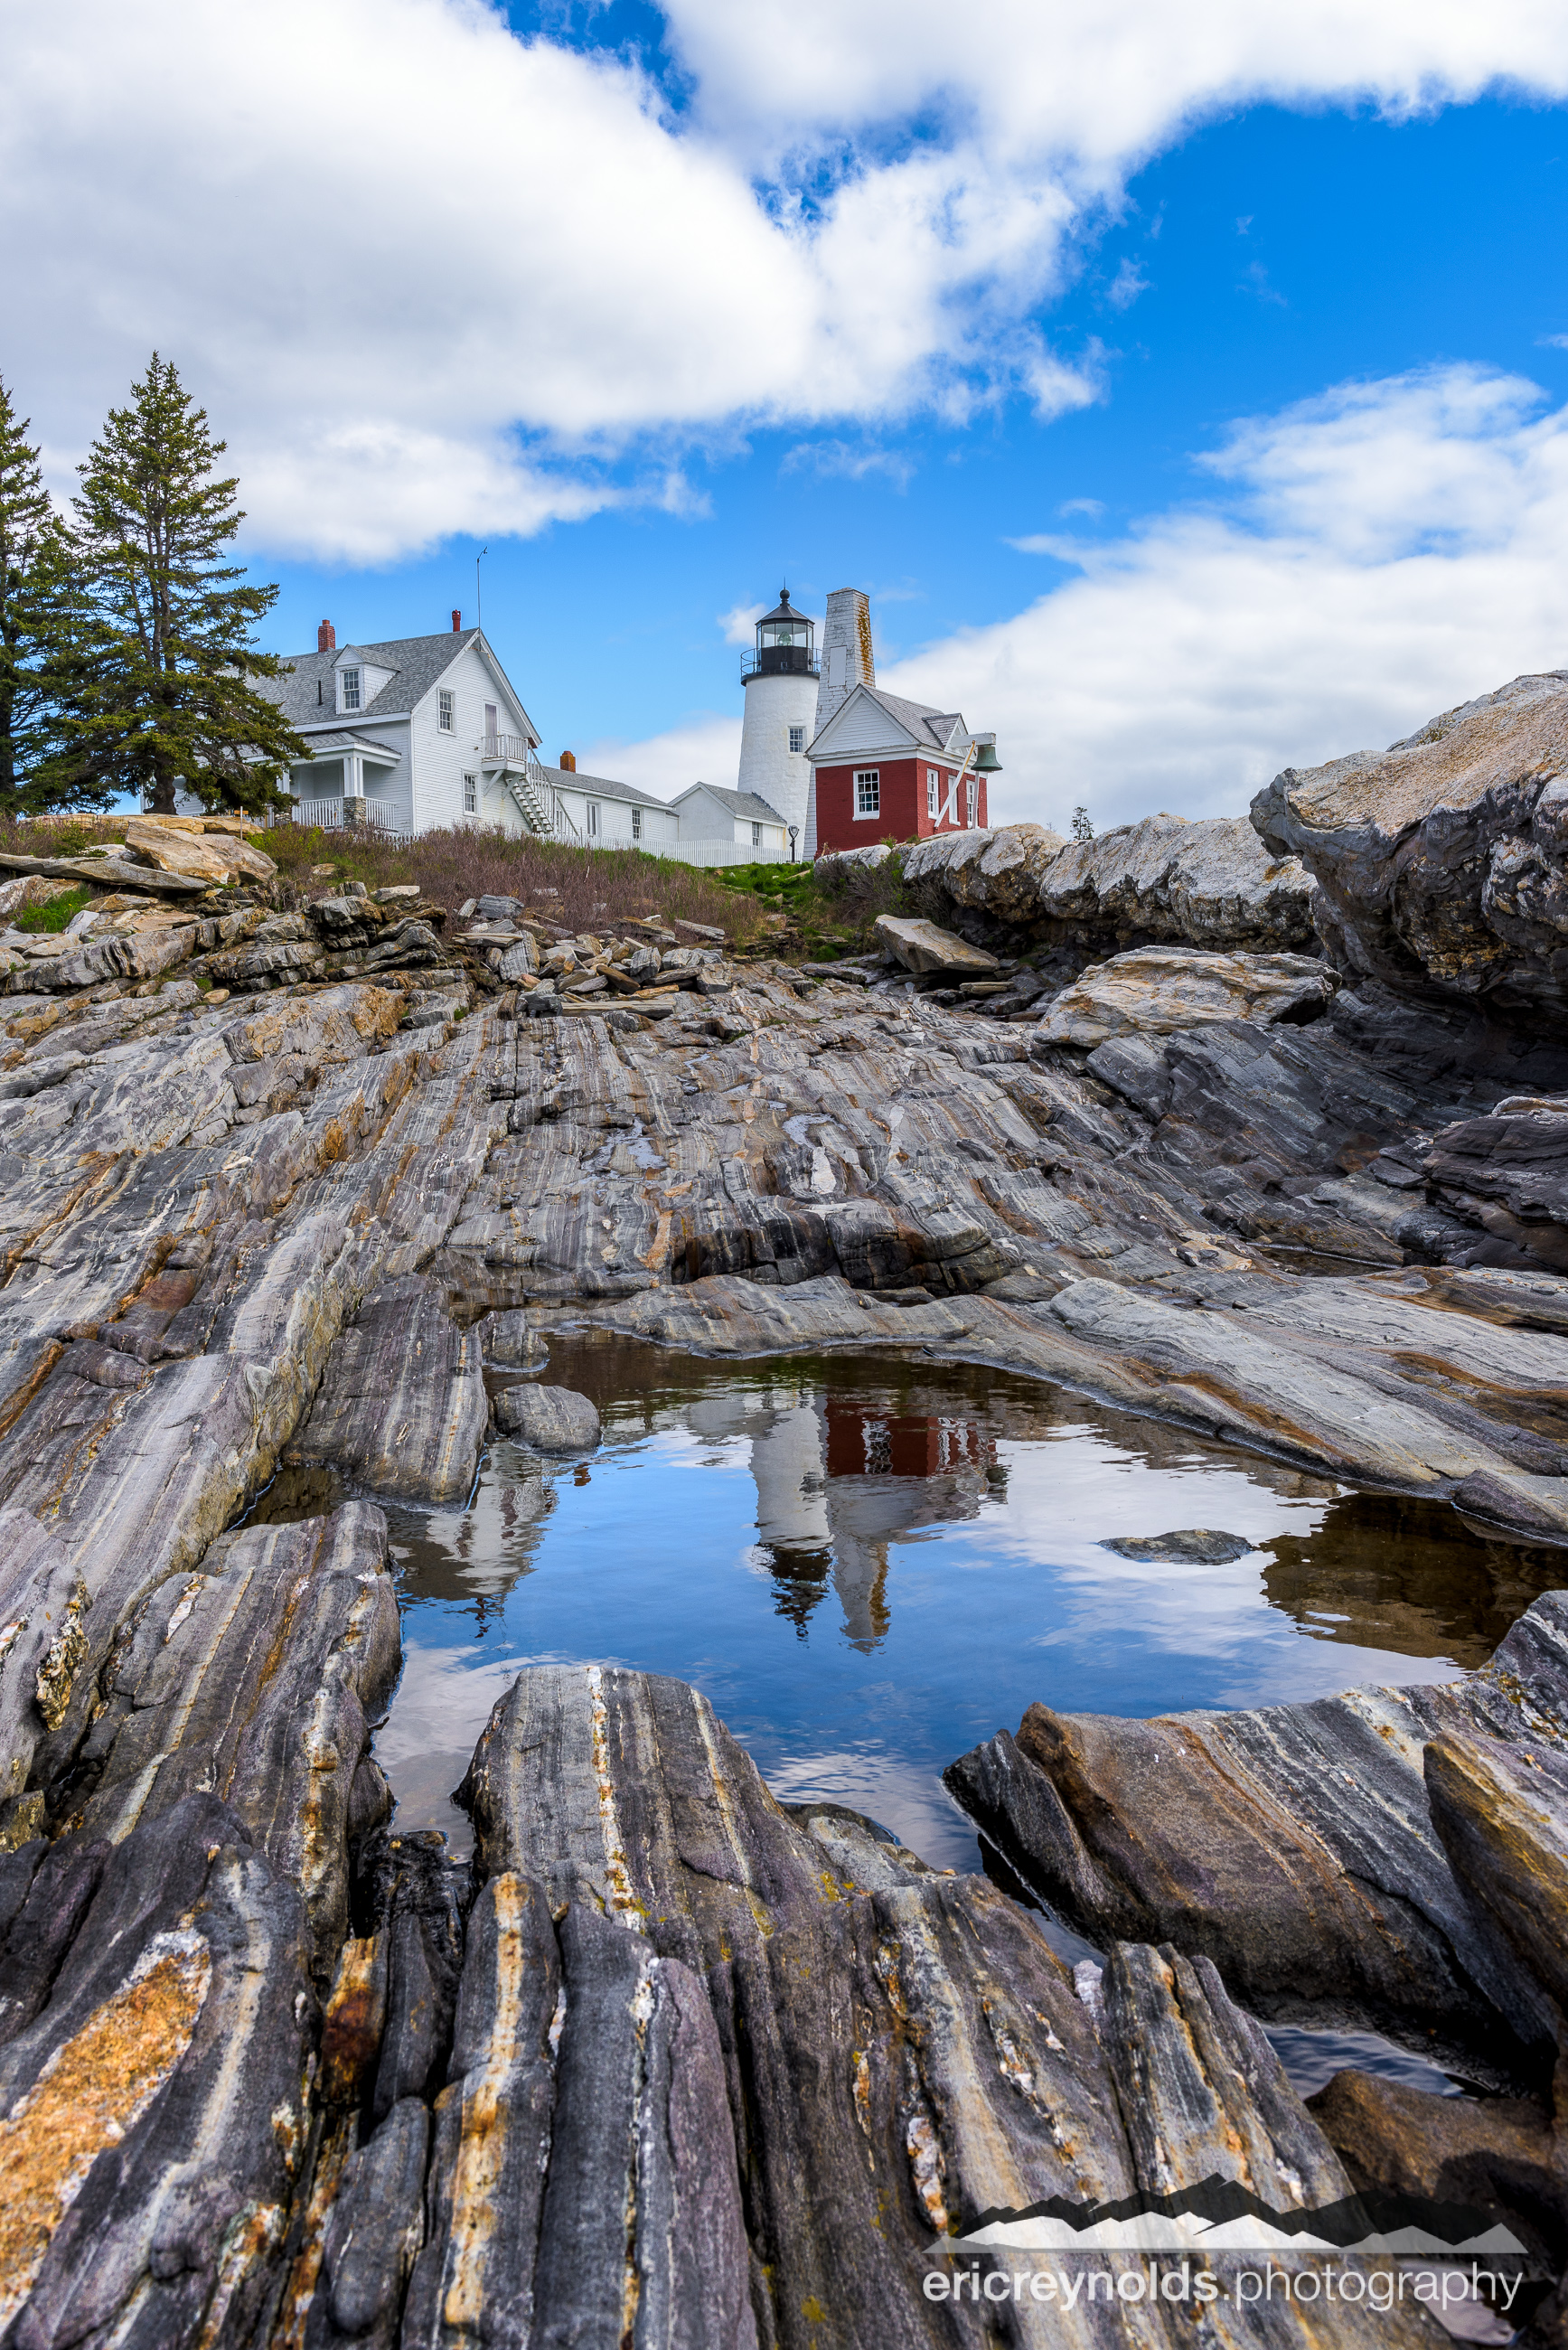 Reflection of Pemaquid Point Lighthouse by Eric Reynolds - Landscape Photographer